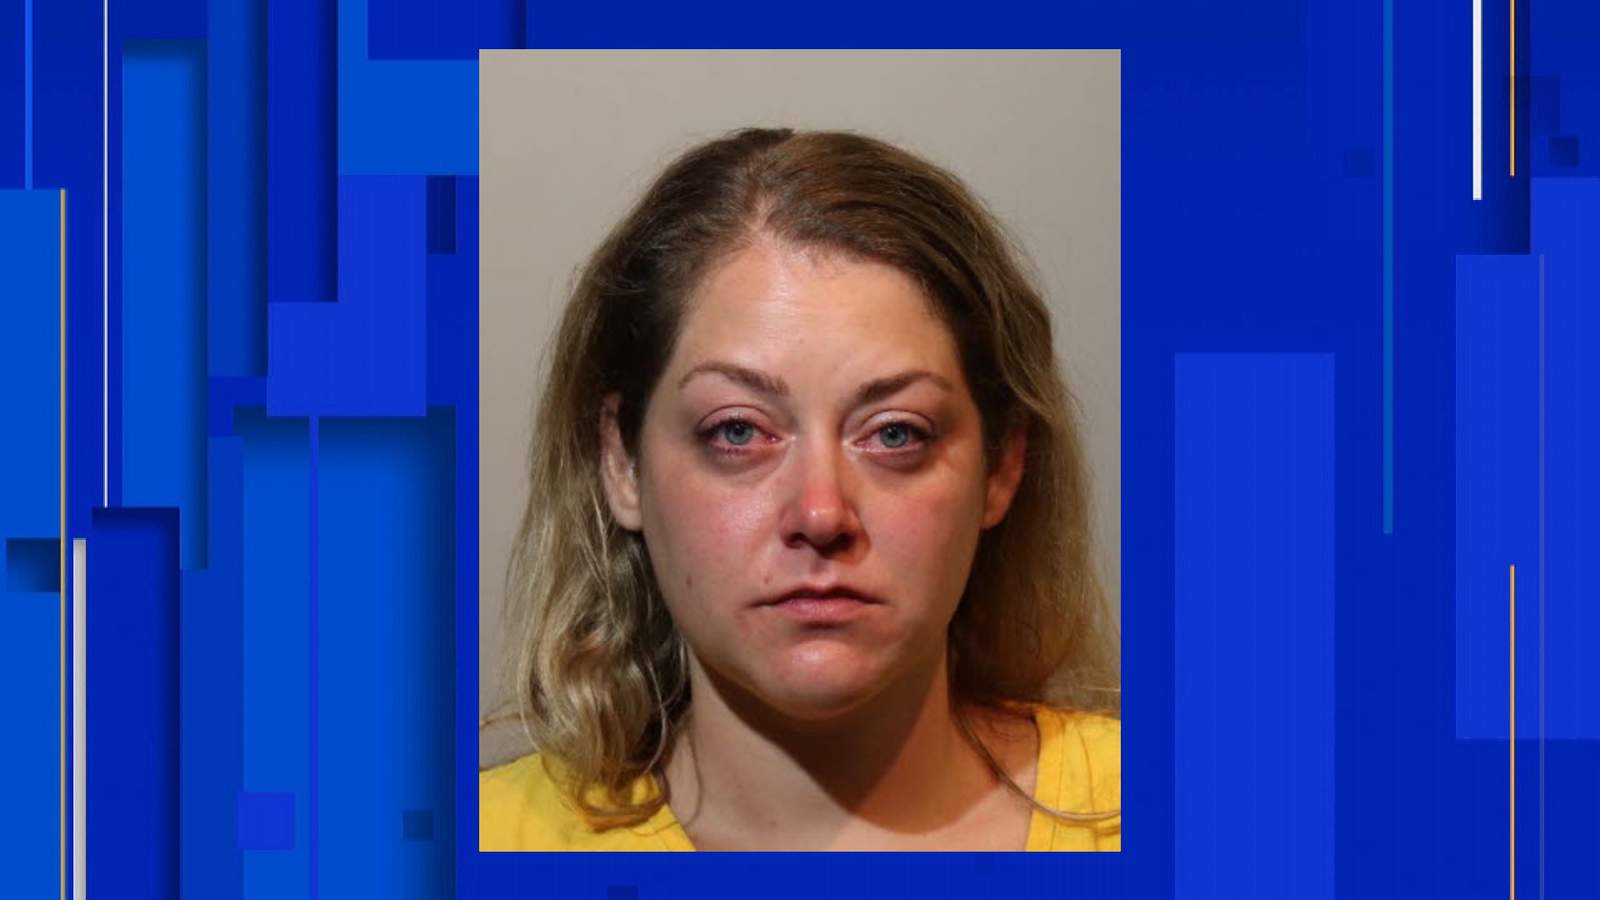 Florida woman drunkenly causes 2 crashes with 4-year-old daughter in car, police say